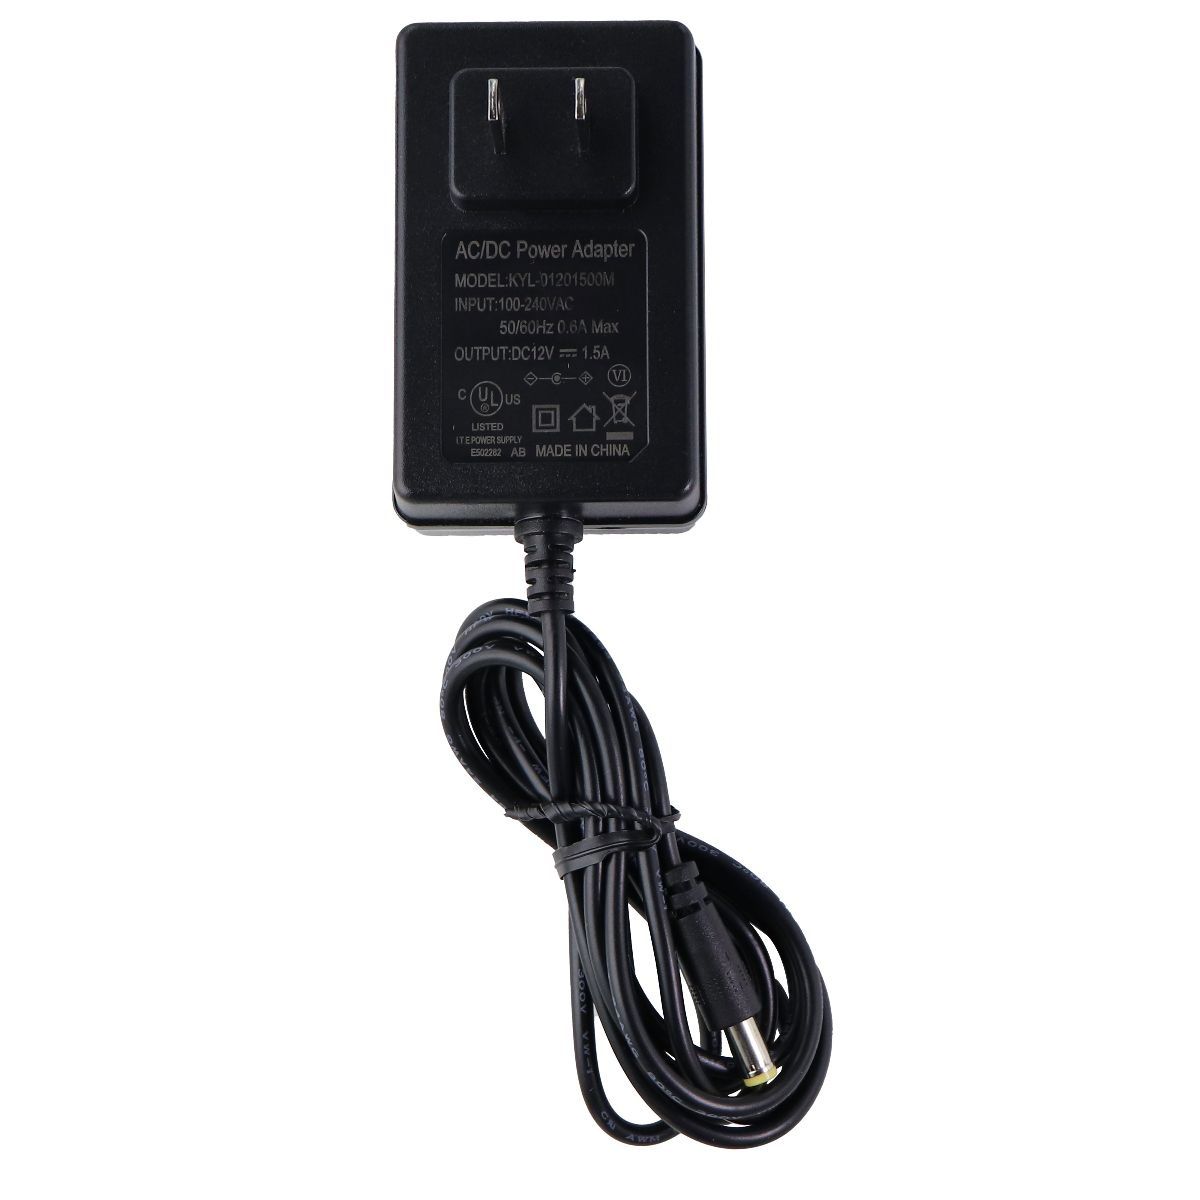 (12V/1.5A) AC/DC Power Adapter Wall Charger - Black (KYL-01201500M) Multipurpose Batteries & Power - Multipurpose AC to DC Adapters Unbranded    - Simple Cell Bulk Wholesale Pricing - USA Seller